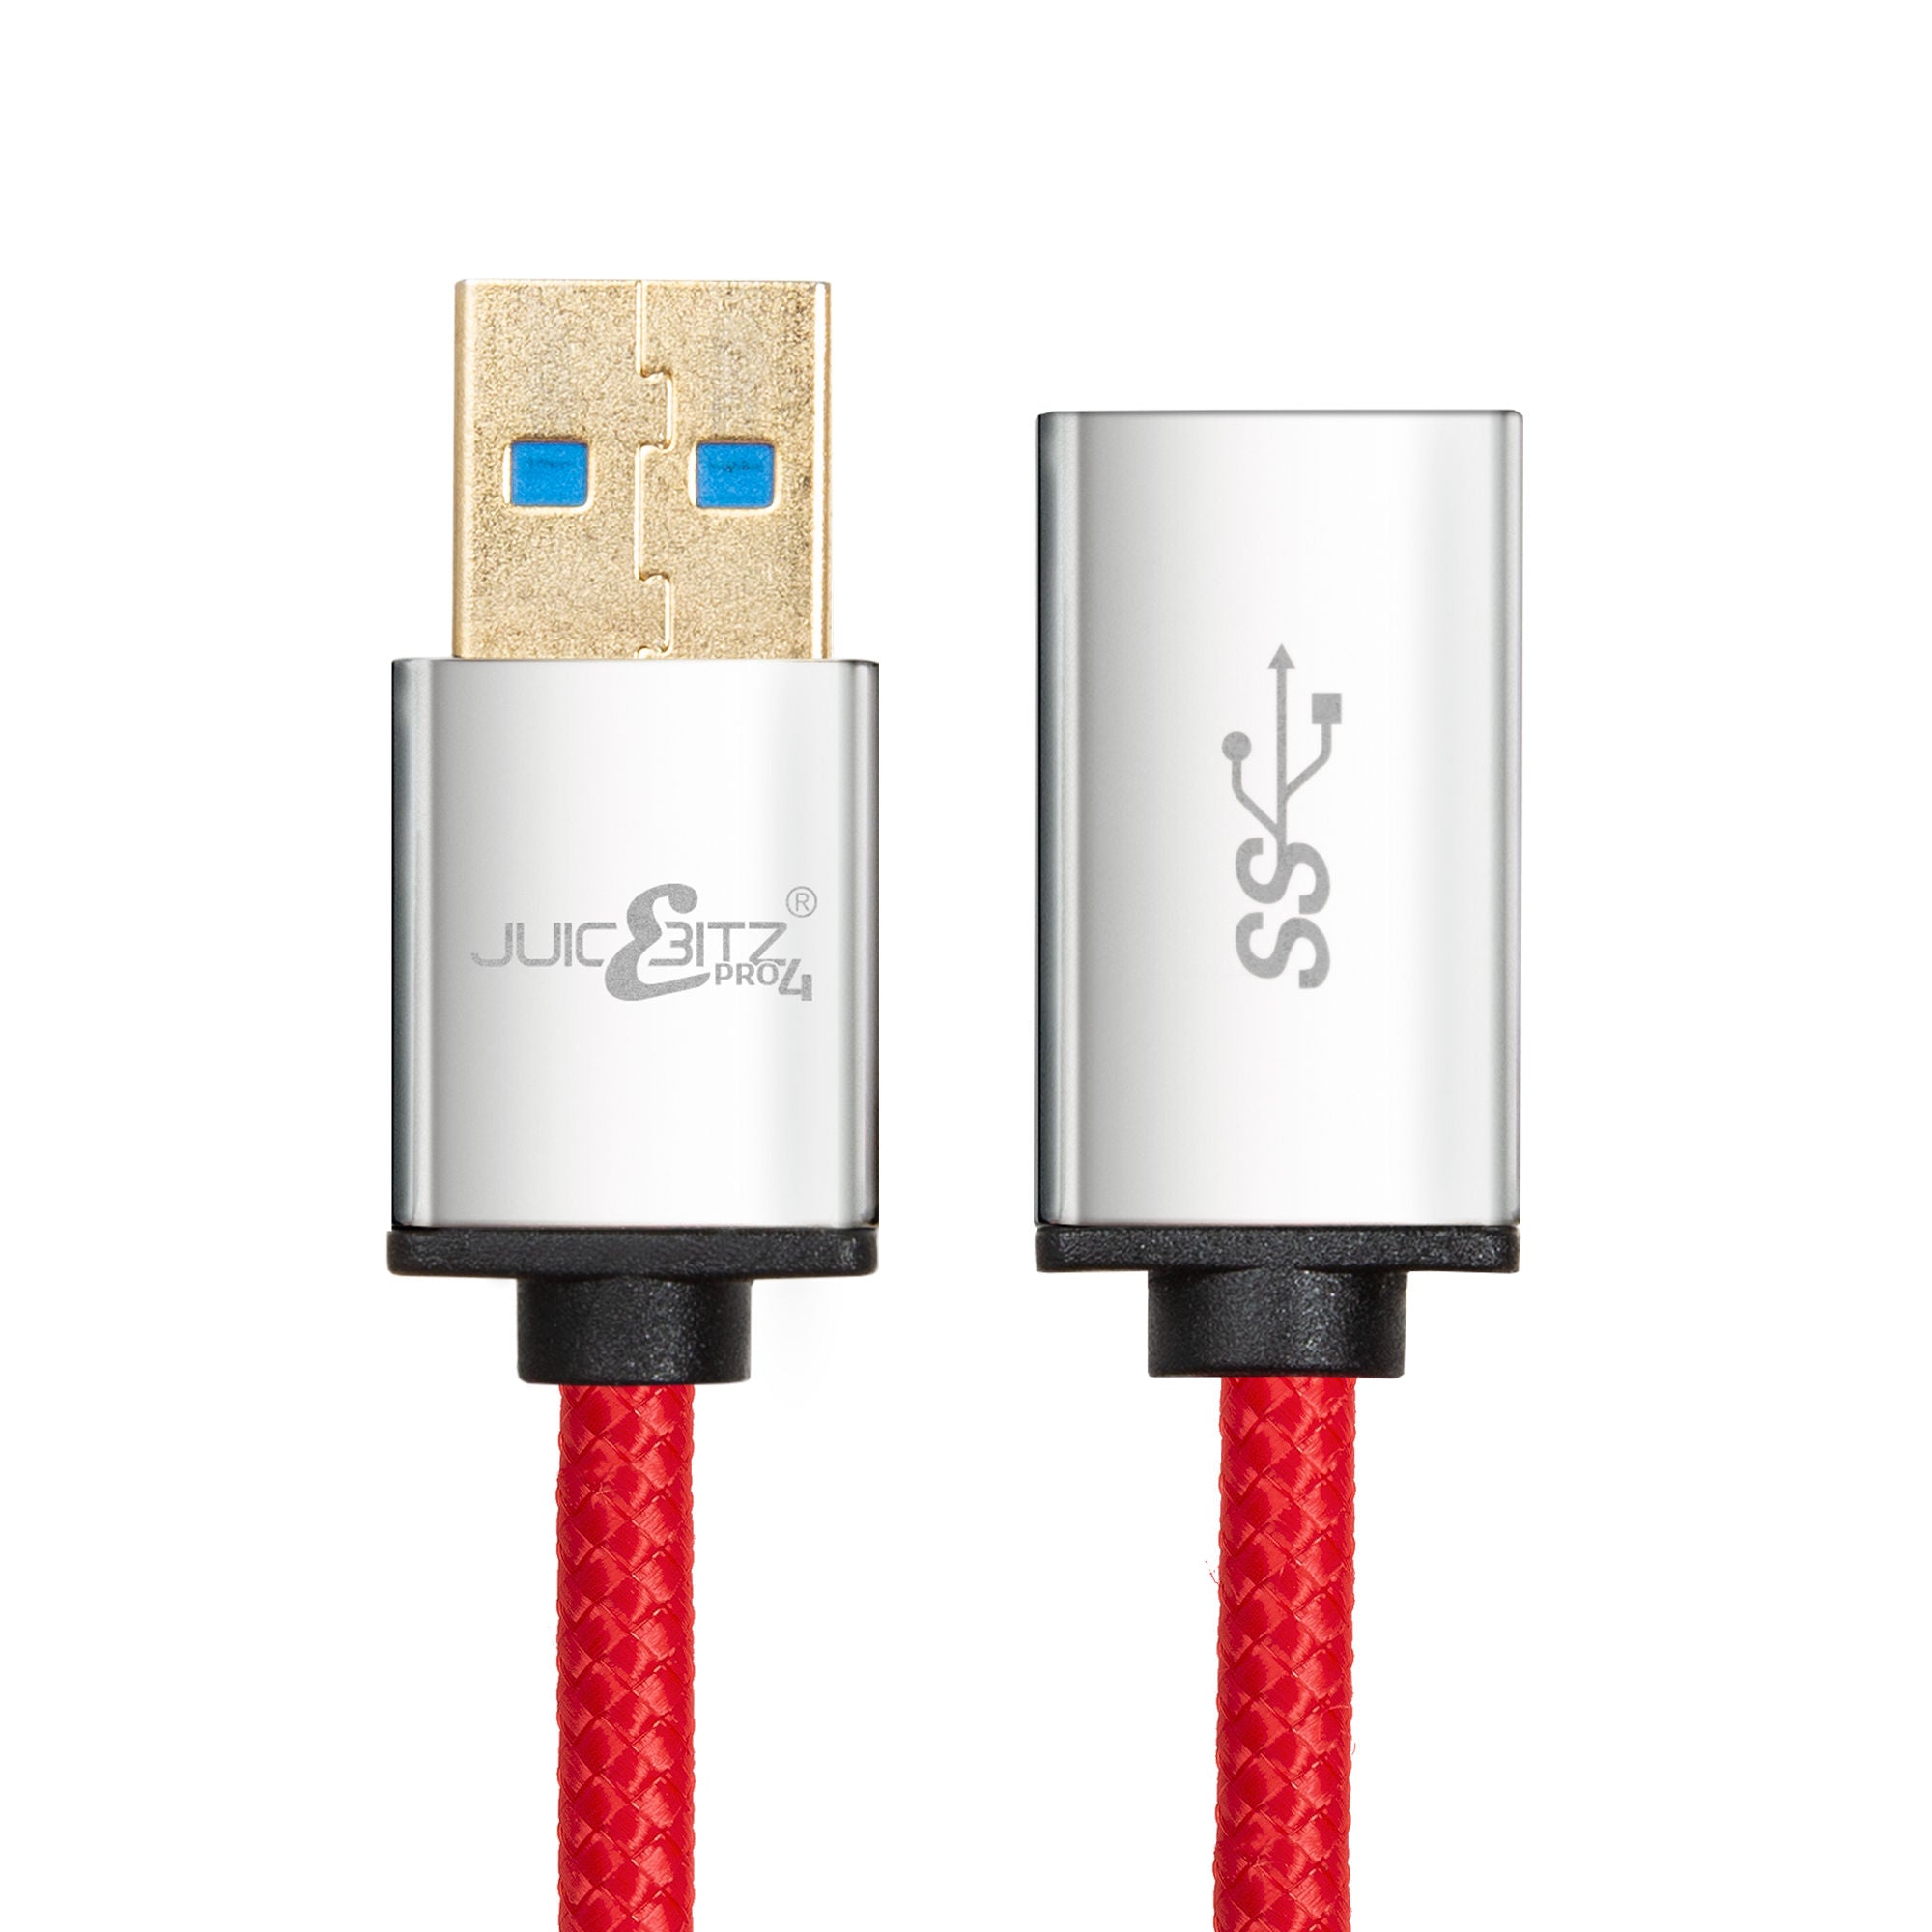 PRO Series Braided Superspeed Male to Female USB3.0 Extension Cable - Red